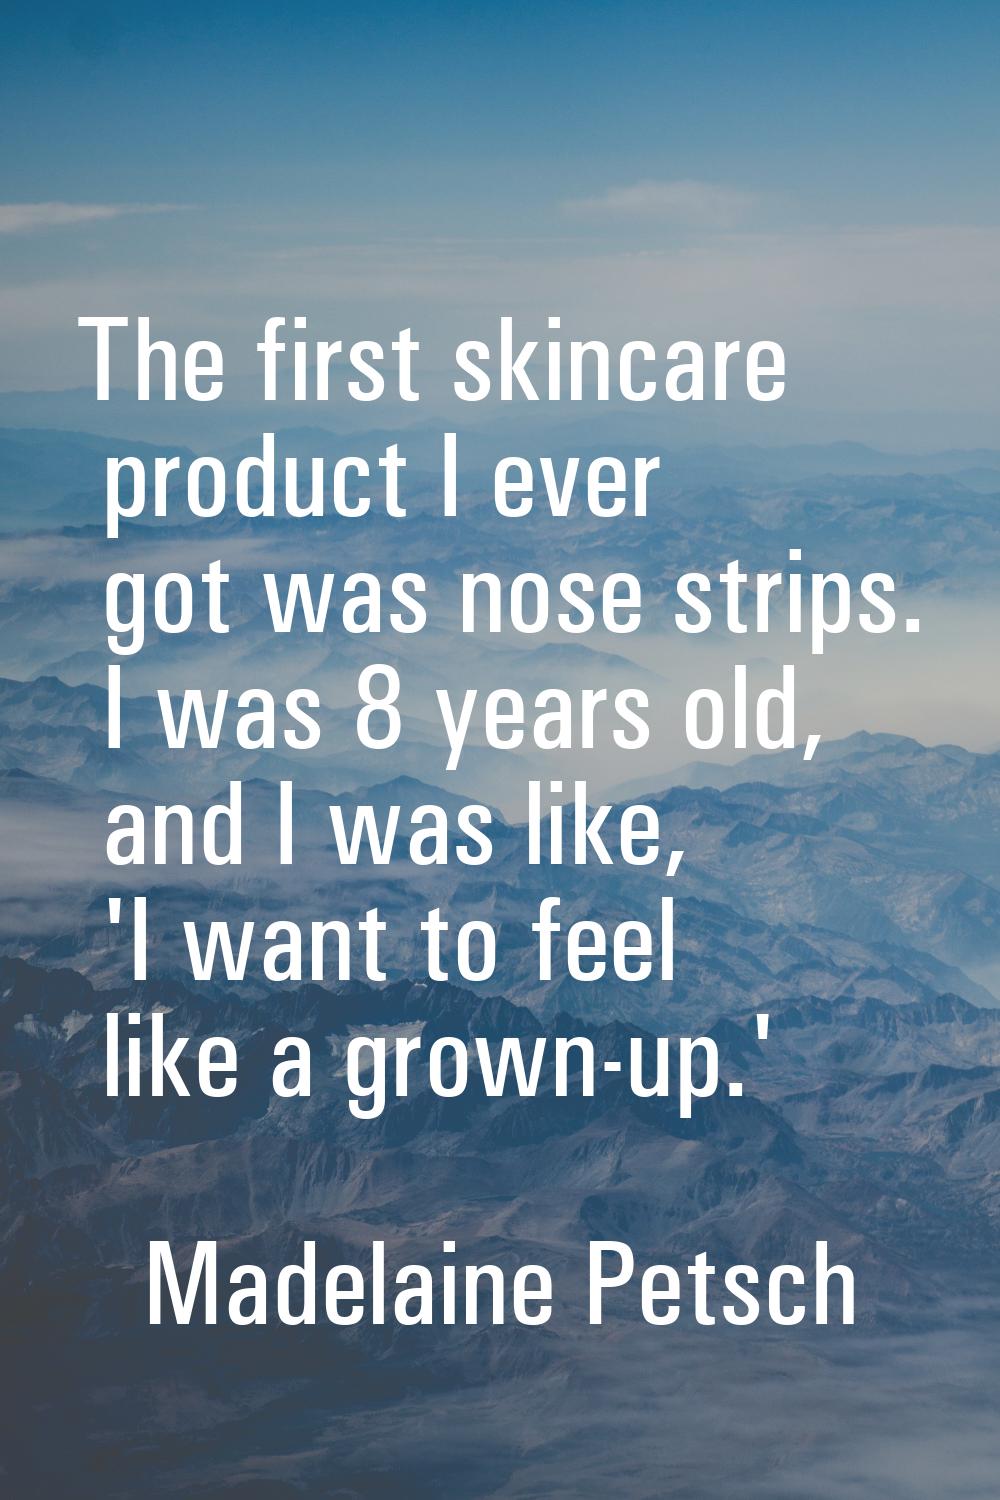 The first skincare product I ever got was nose strips. I was 8 years old, and I was like, 'I want t